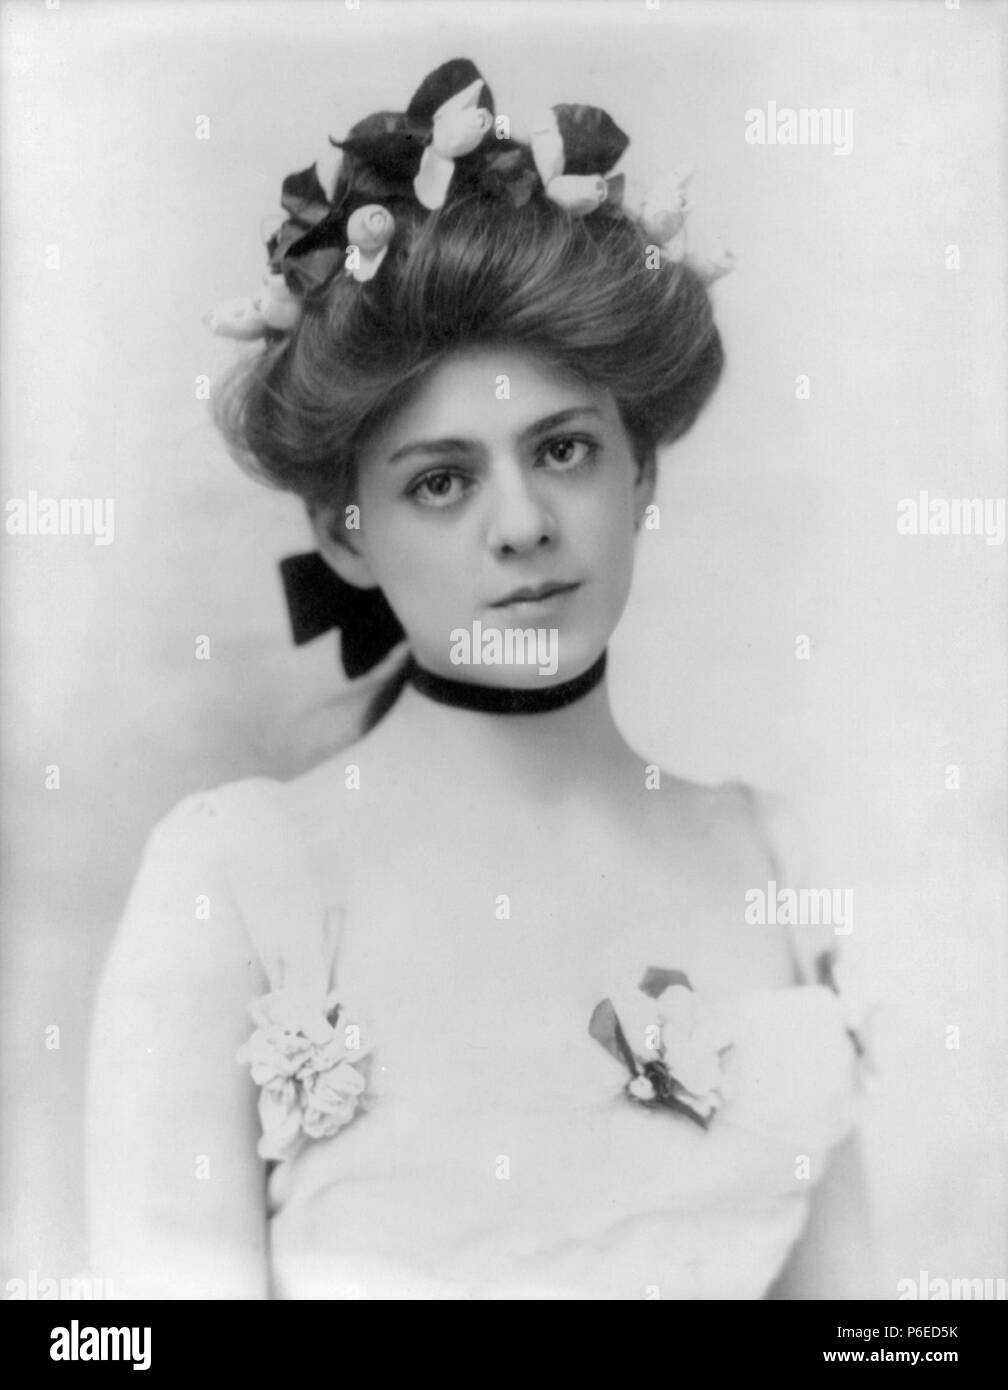 Broadway and Hollywood actress Ethel Barrymore, a member of the famous Barrymore family, head-and-shoulders portrait, facing right.. 1901 42 Ethel Barrymore by Burr McIntosh, 1901 Stock Photo